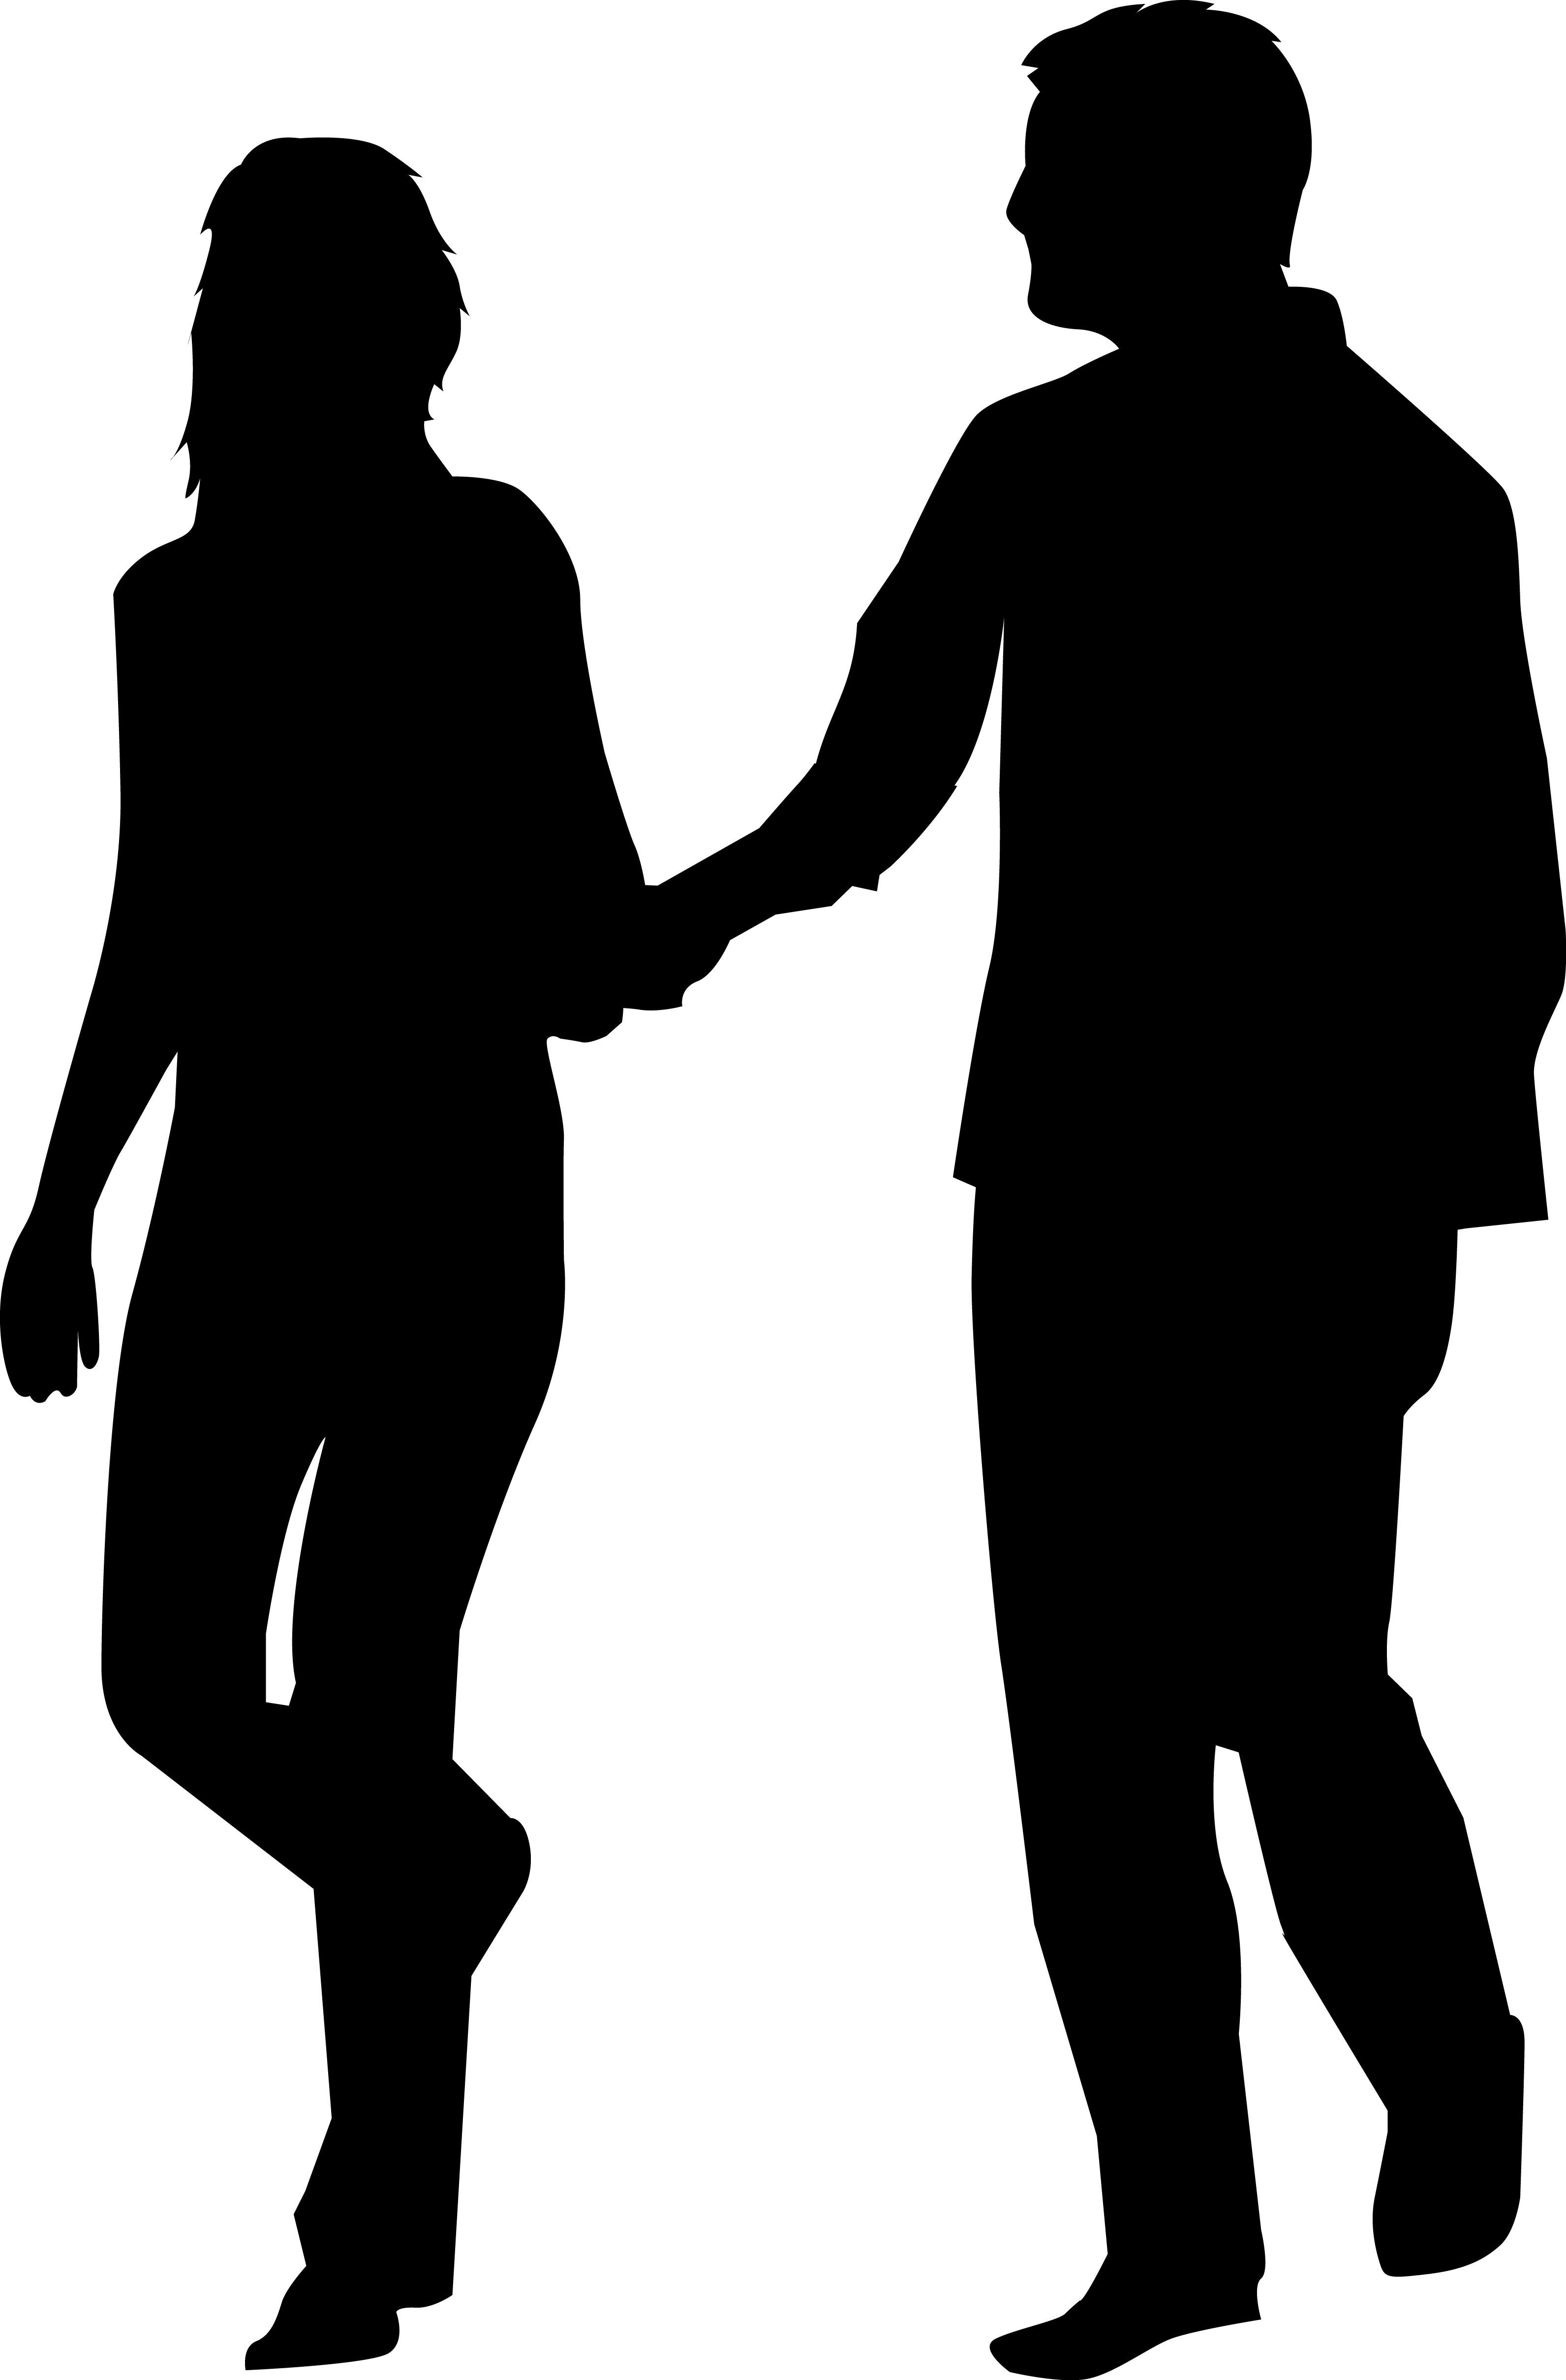 Silhouette Of Man And Woman | Free Download Clip Art | Free Clip ...